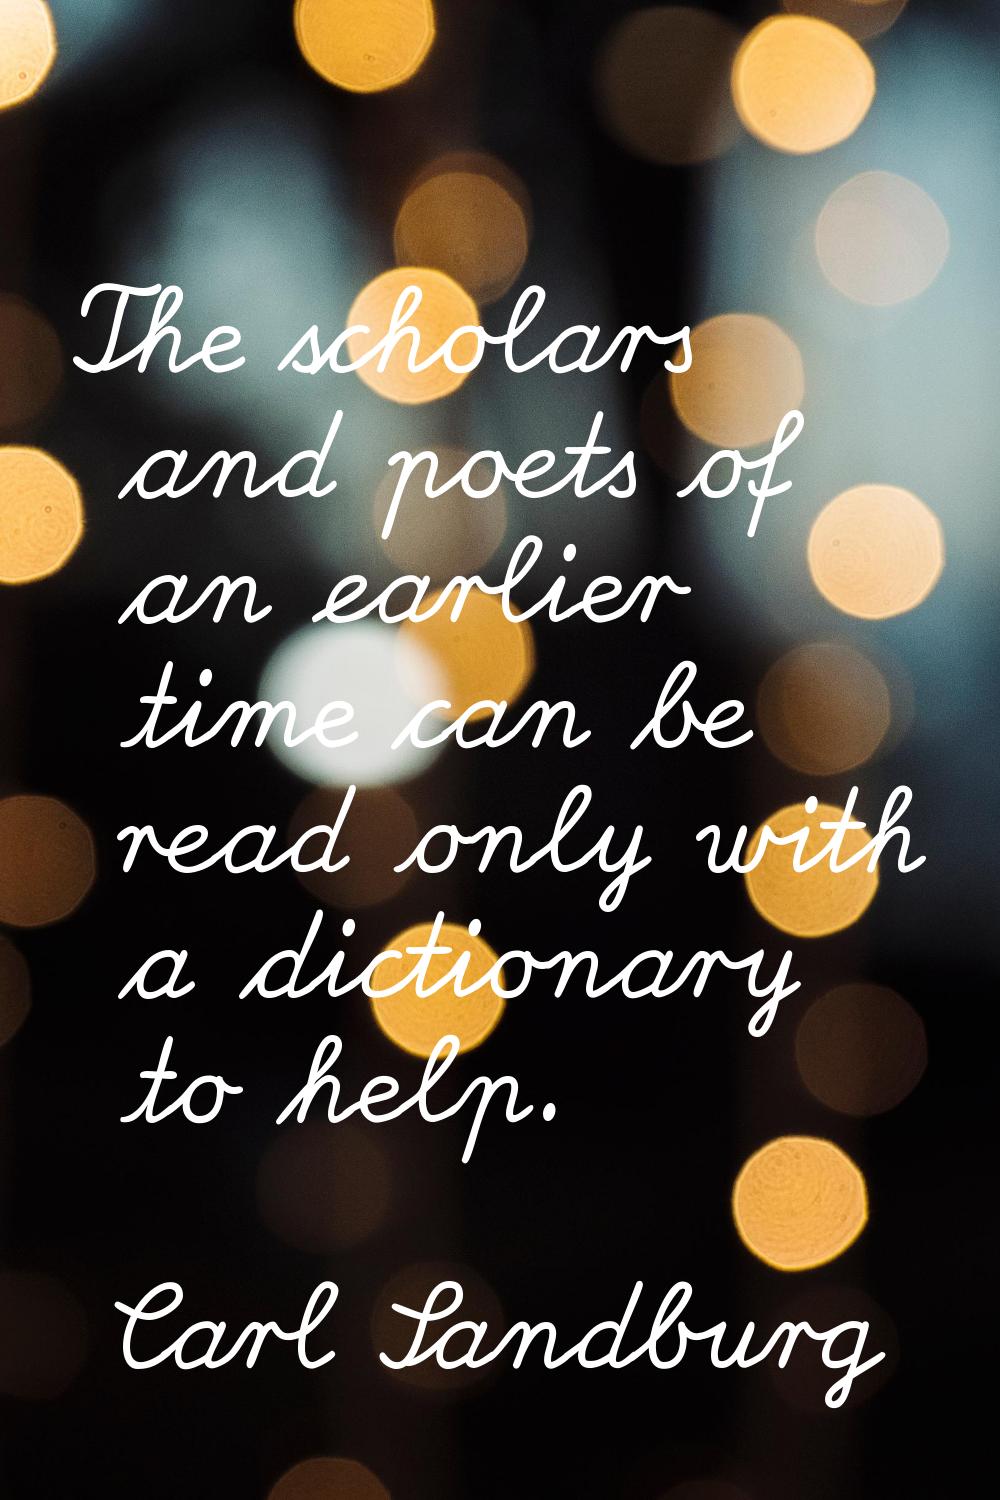 The scholars and poets of an earlier time can be read only with a dictionary to help.